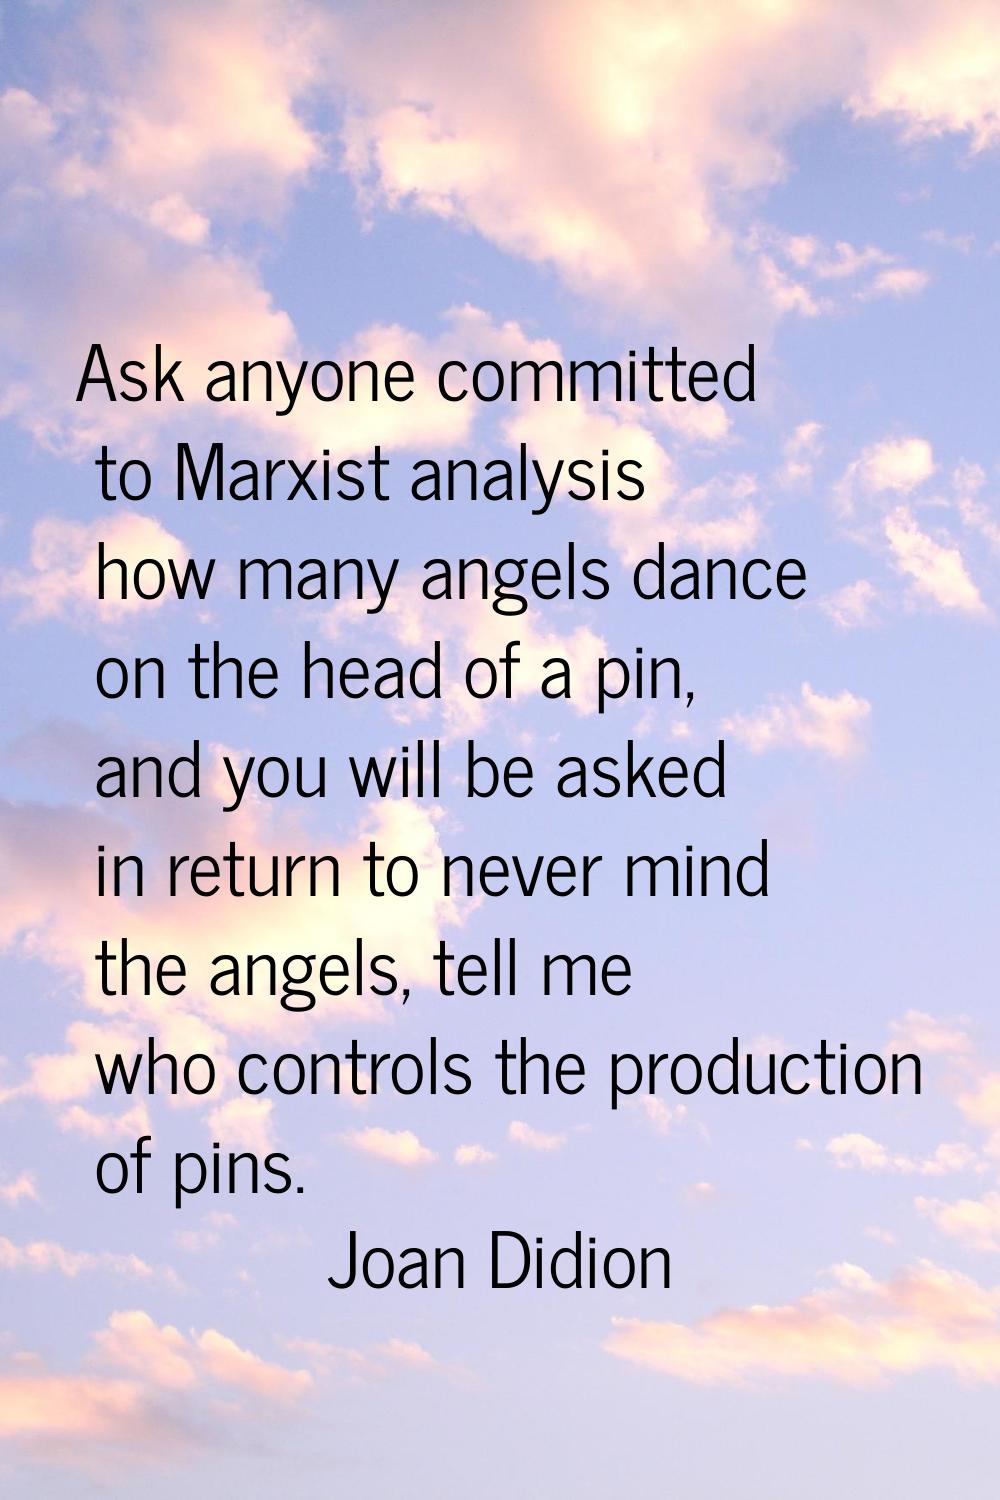 Ask anyone committed to Marxist analysis how many angels dance on the head of a pin, and you will b